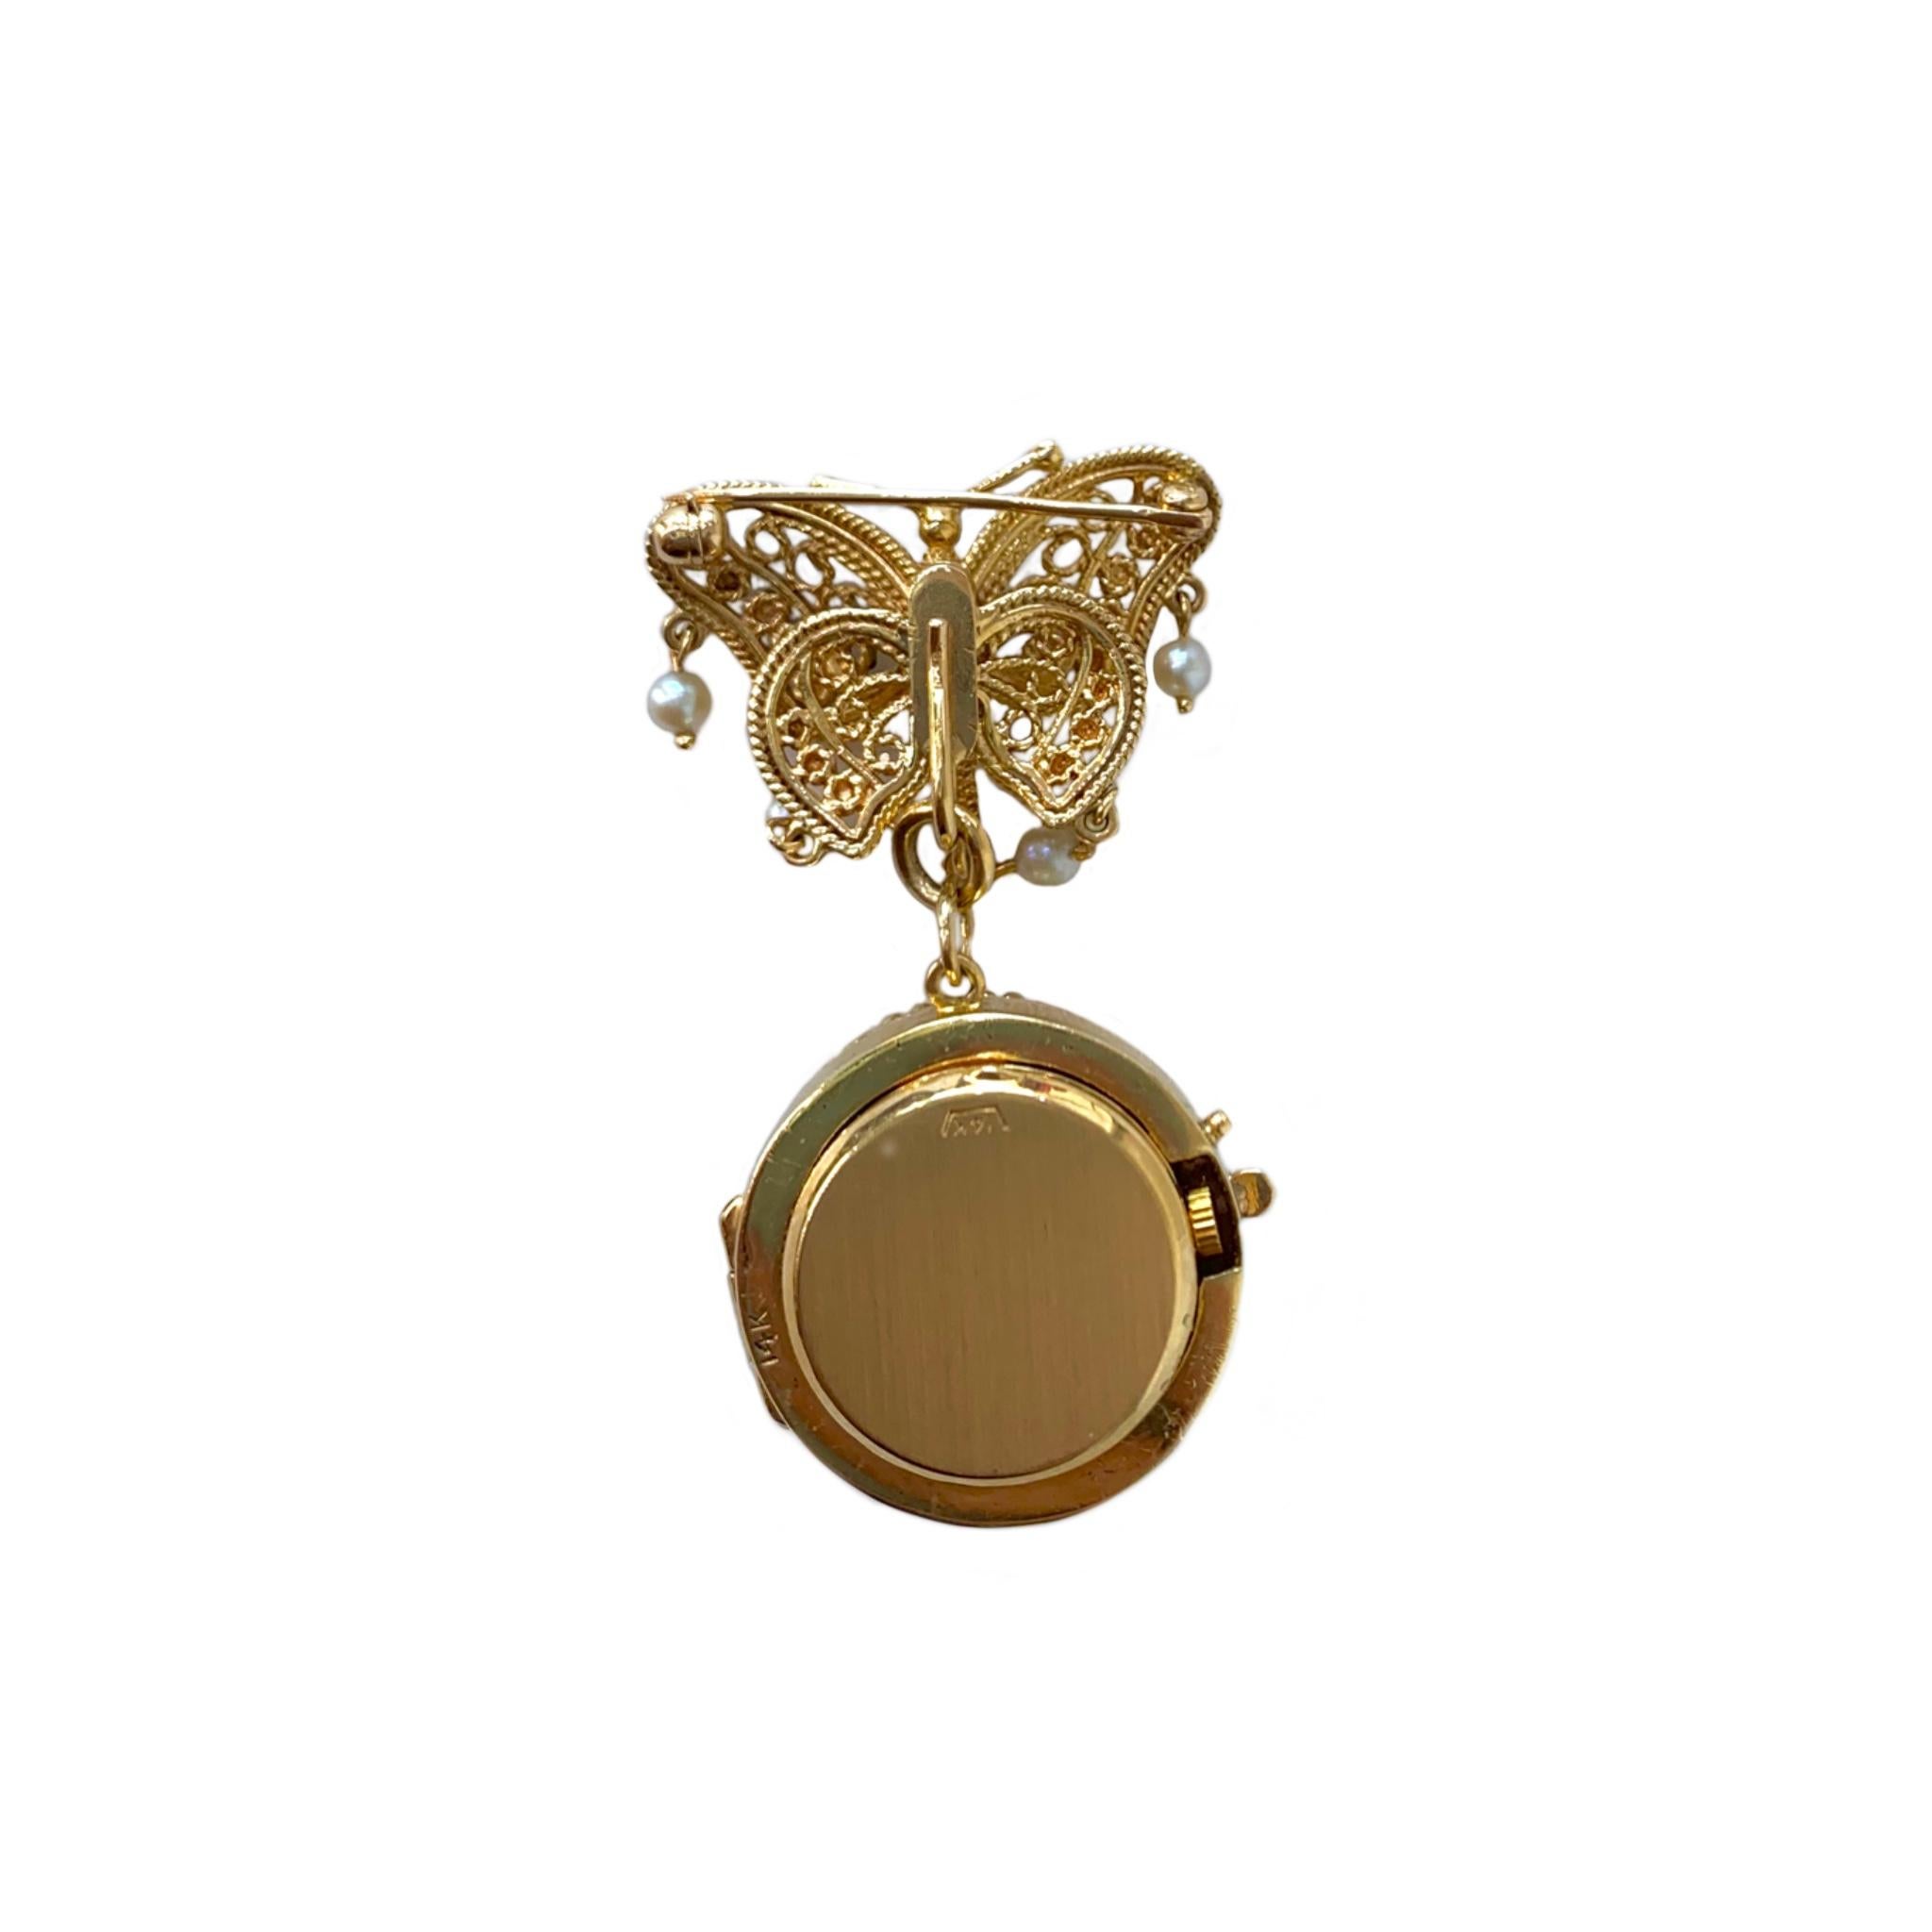 The 14 karat yellow gold brooch has a detachable hand painted miniature. The butterfly contains 14 pearls and may be worn alone. The movement has been converted to Swiss quartz for convenience. 